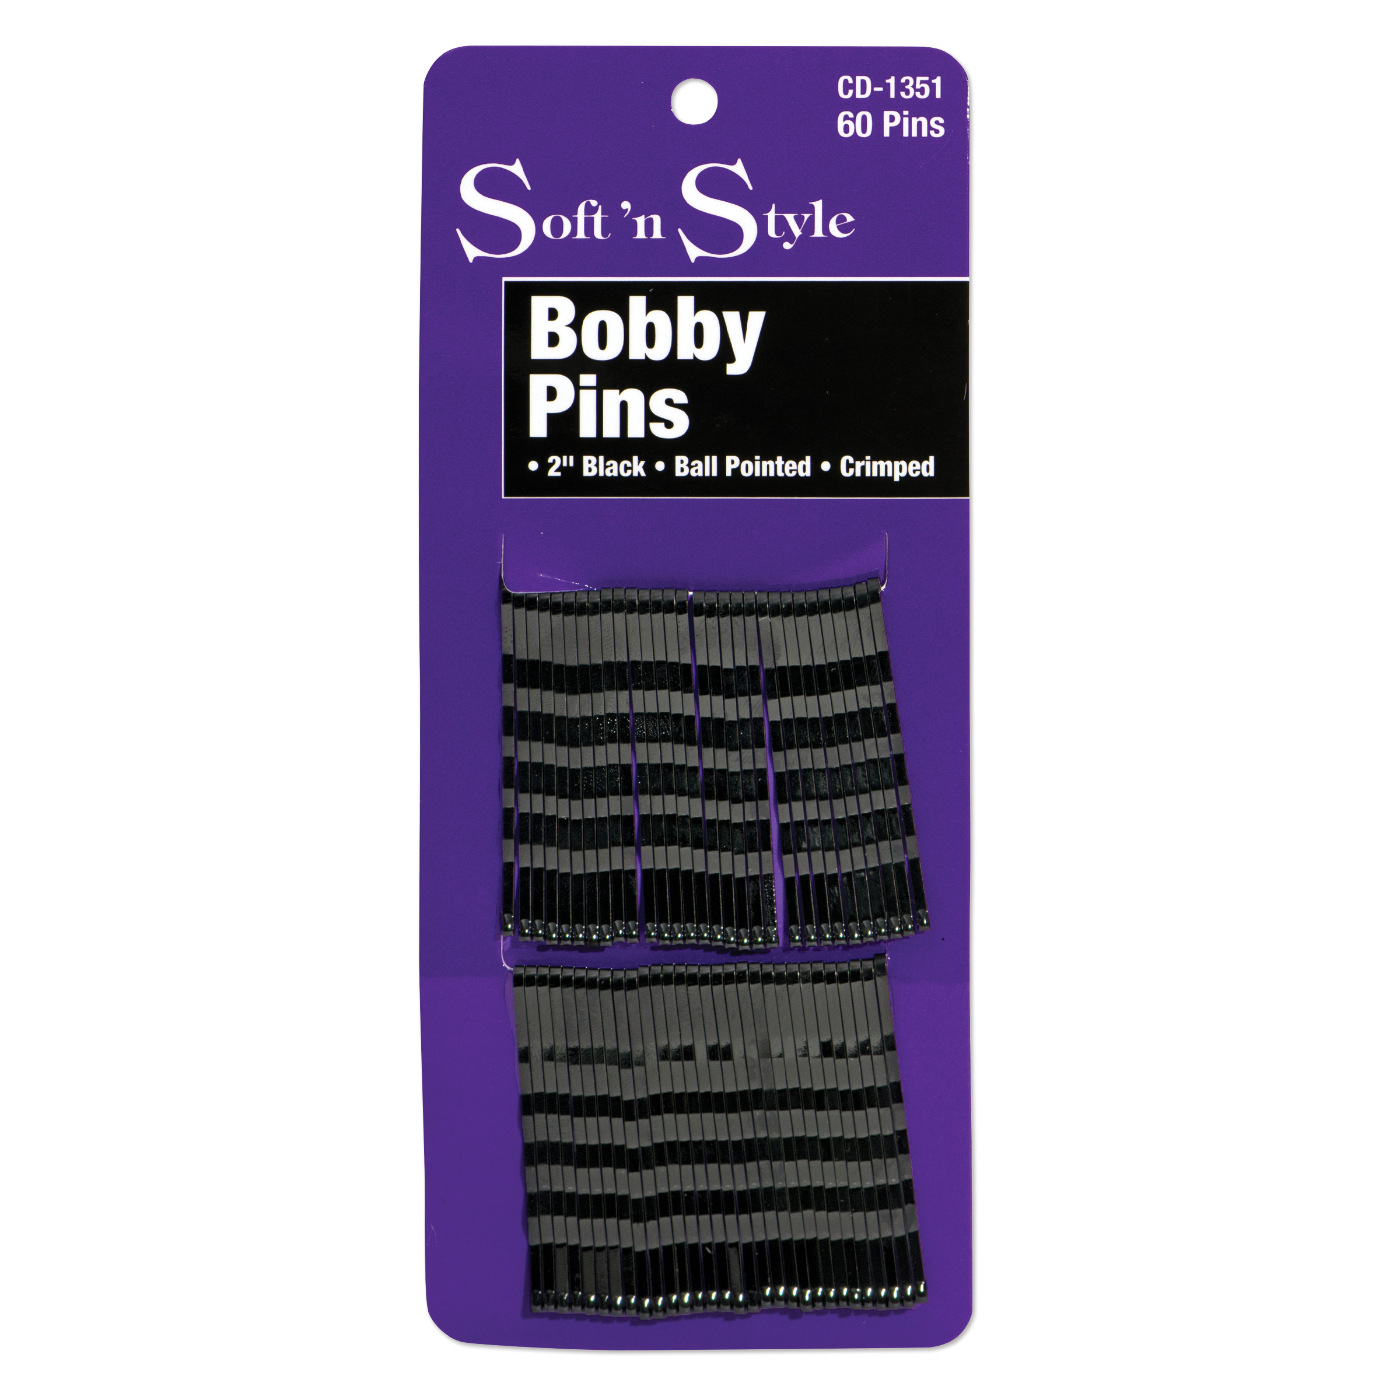 Soft and Style Bobby Pins, Black - 2" 60 pins card